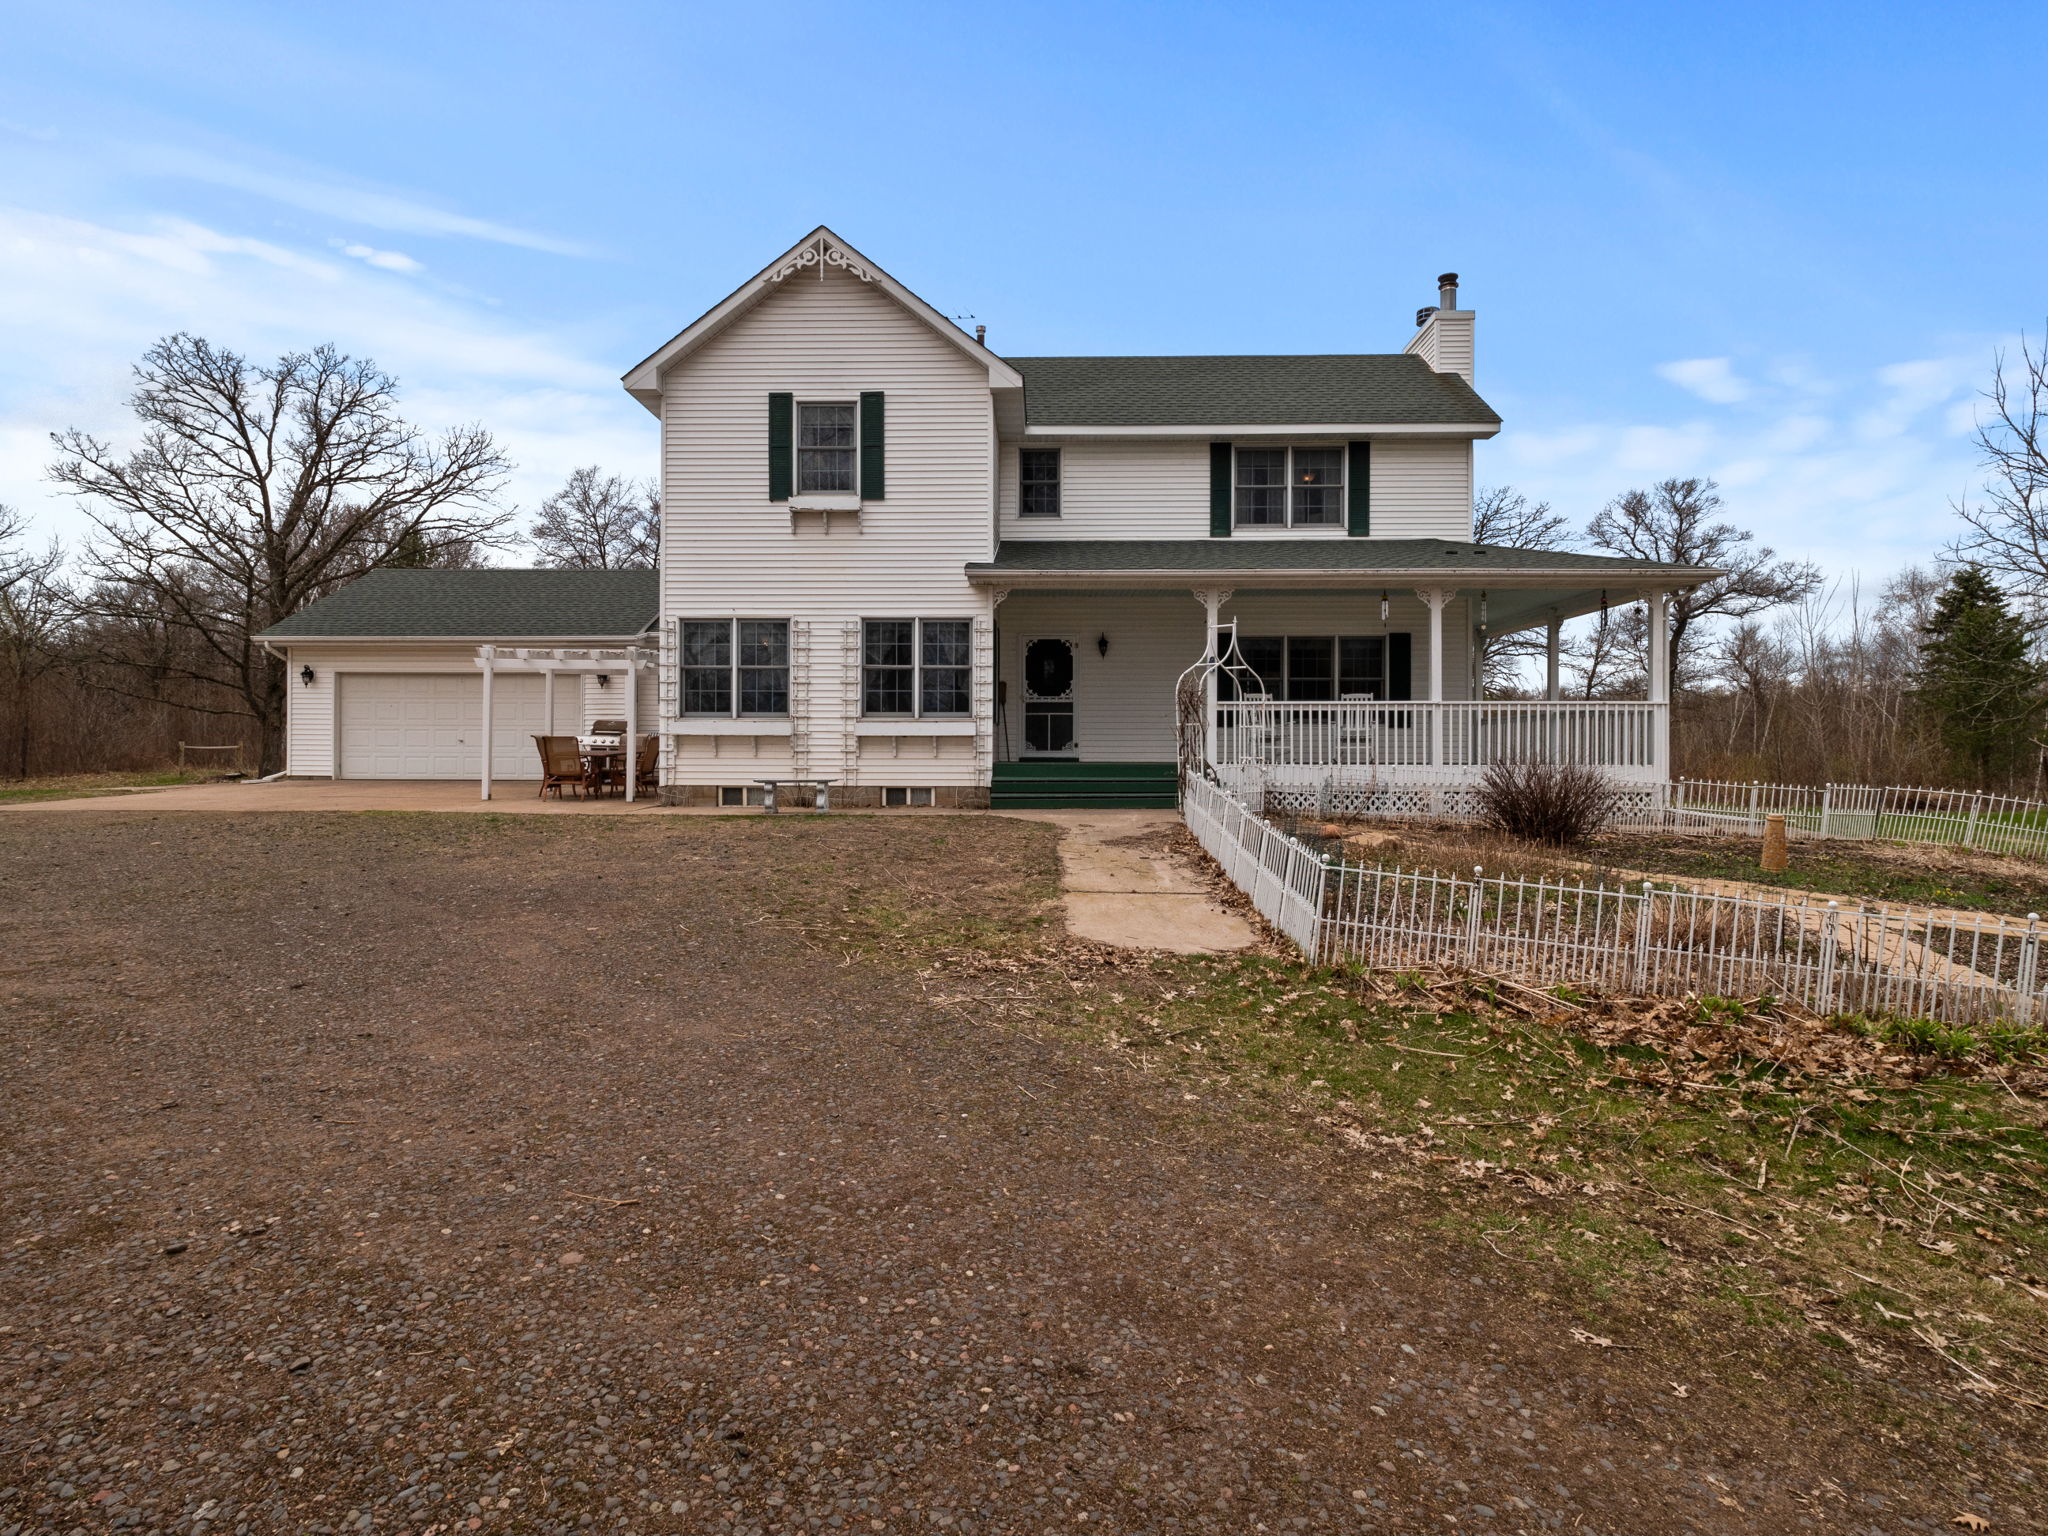  56290 Nature Ave, Pine City, MN 55063, US